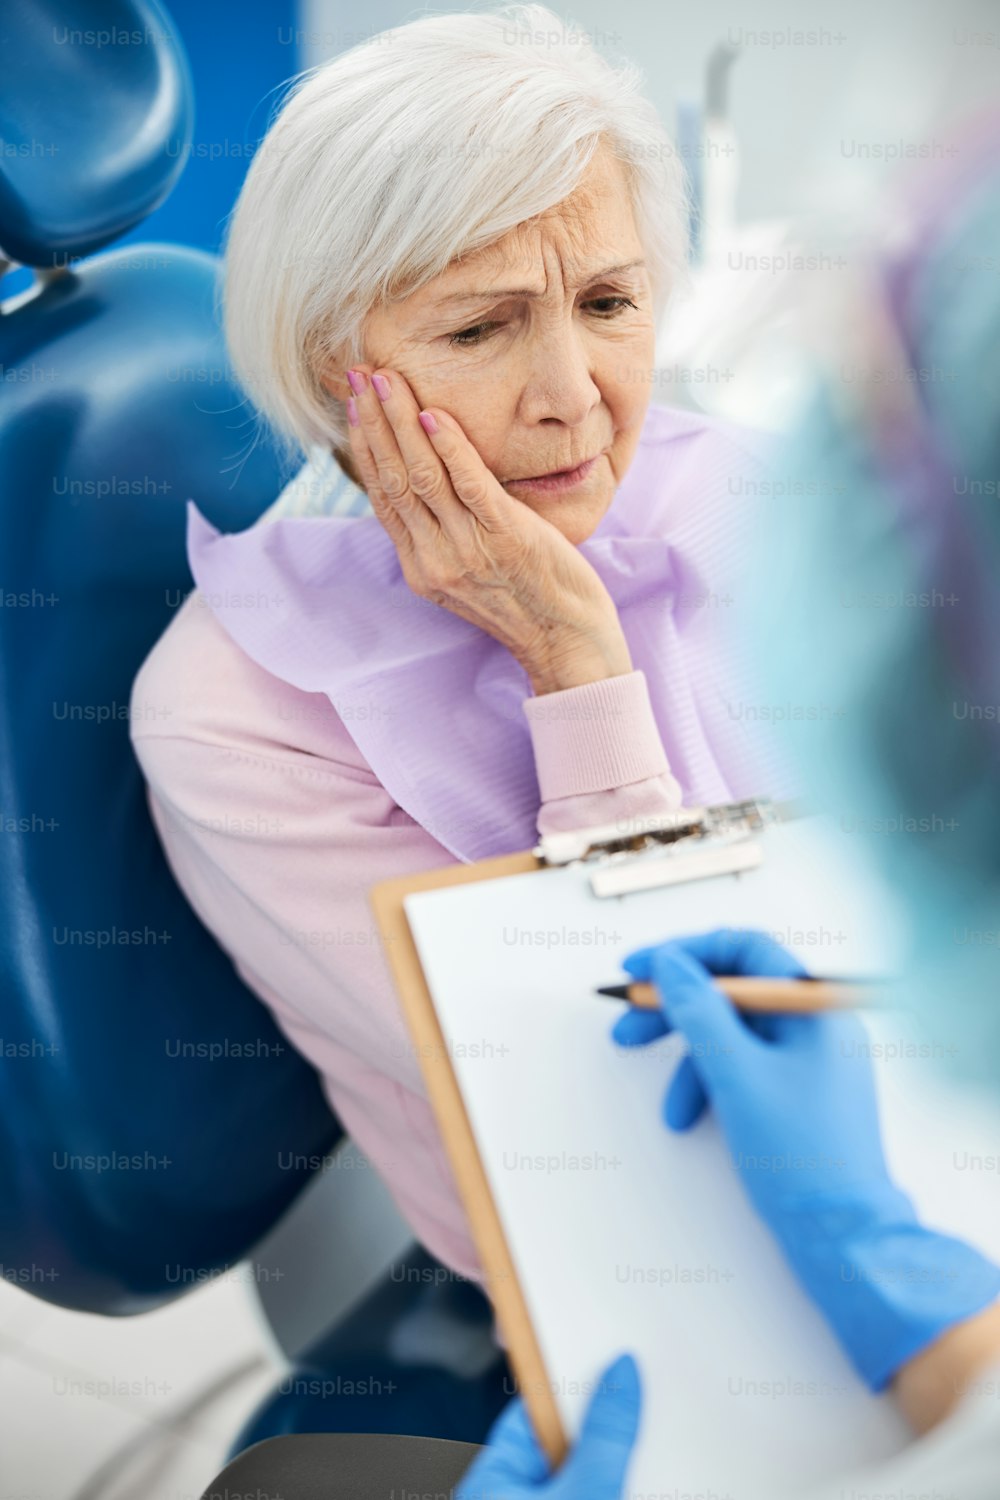 Upset aged lady pressing her palm to right cheek while telling about her dental issues to a person making notes